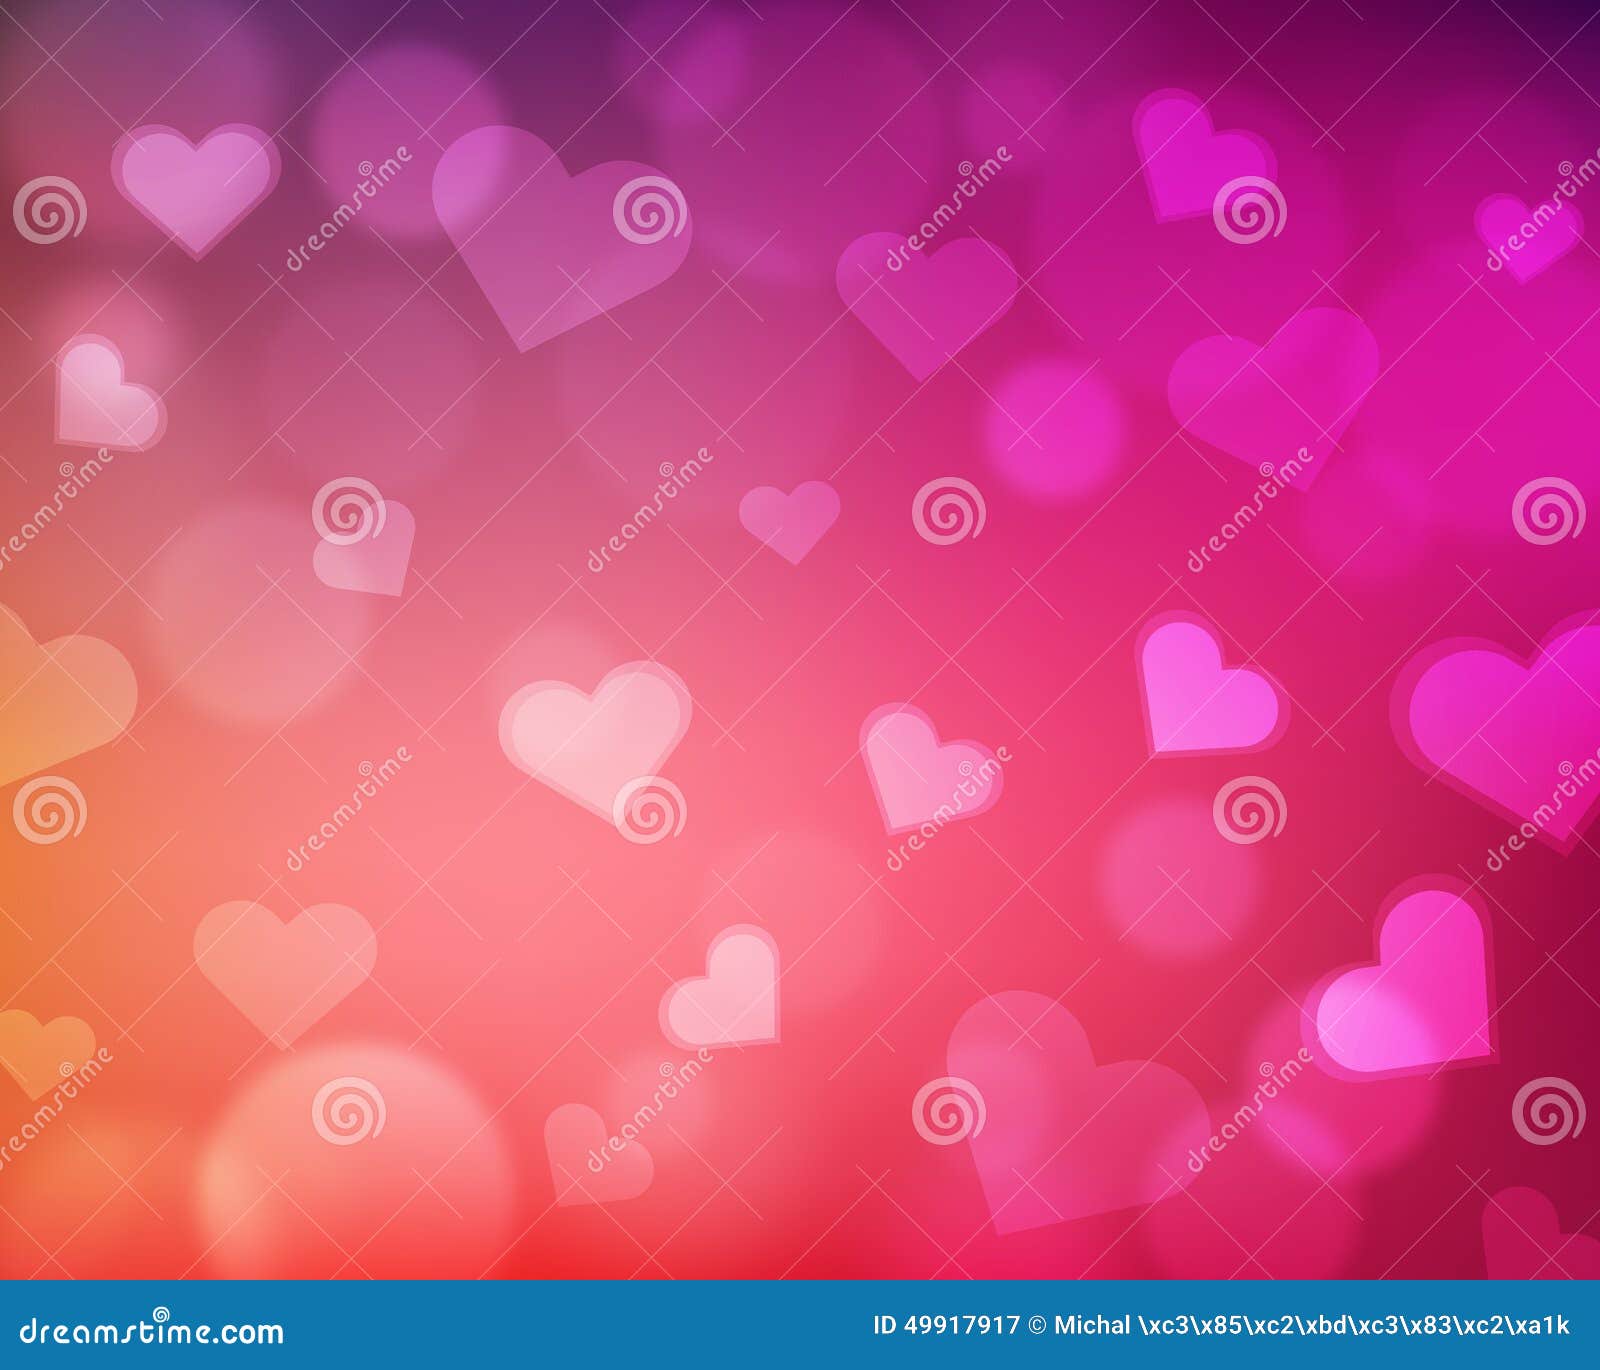 Love theme on background Royalty Free Vector Image